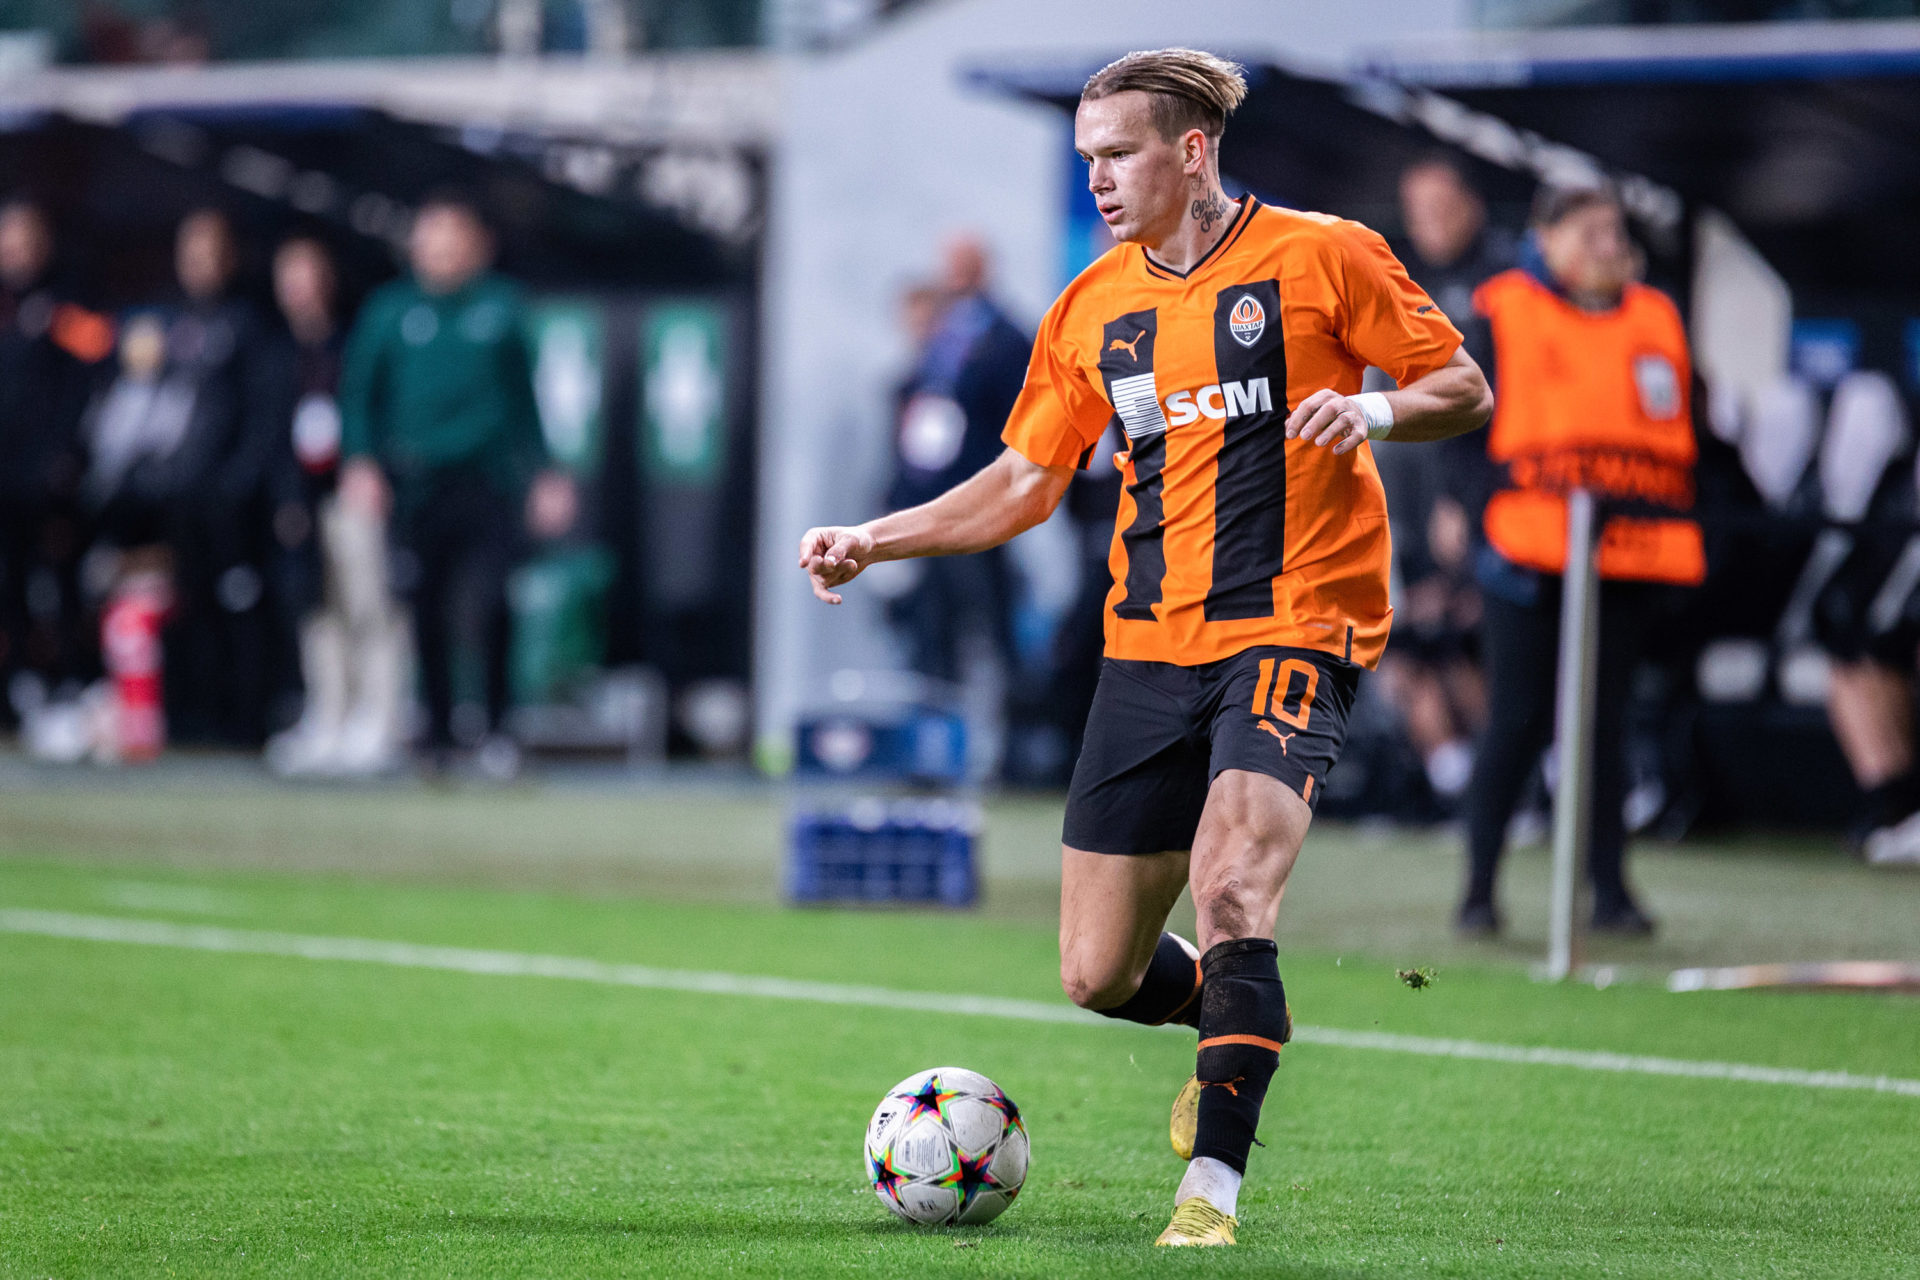 Mykhailo Mudryk of Shakhtar seen in action during the UEFA